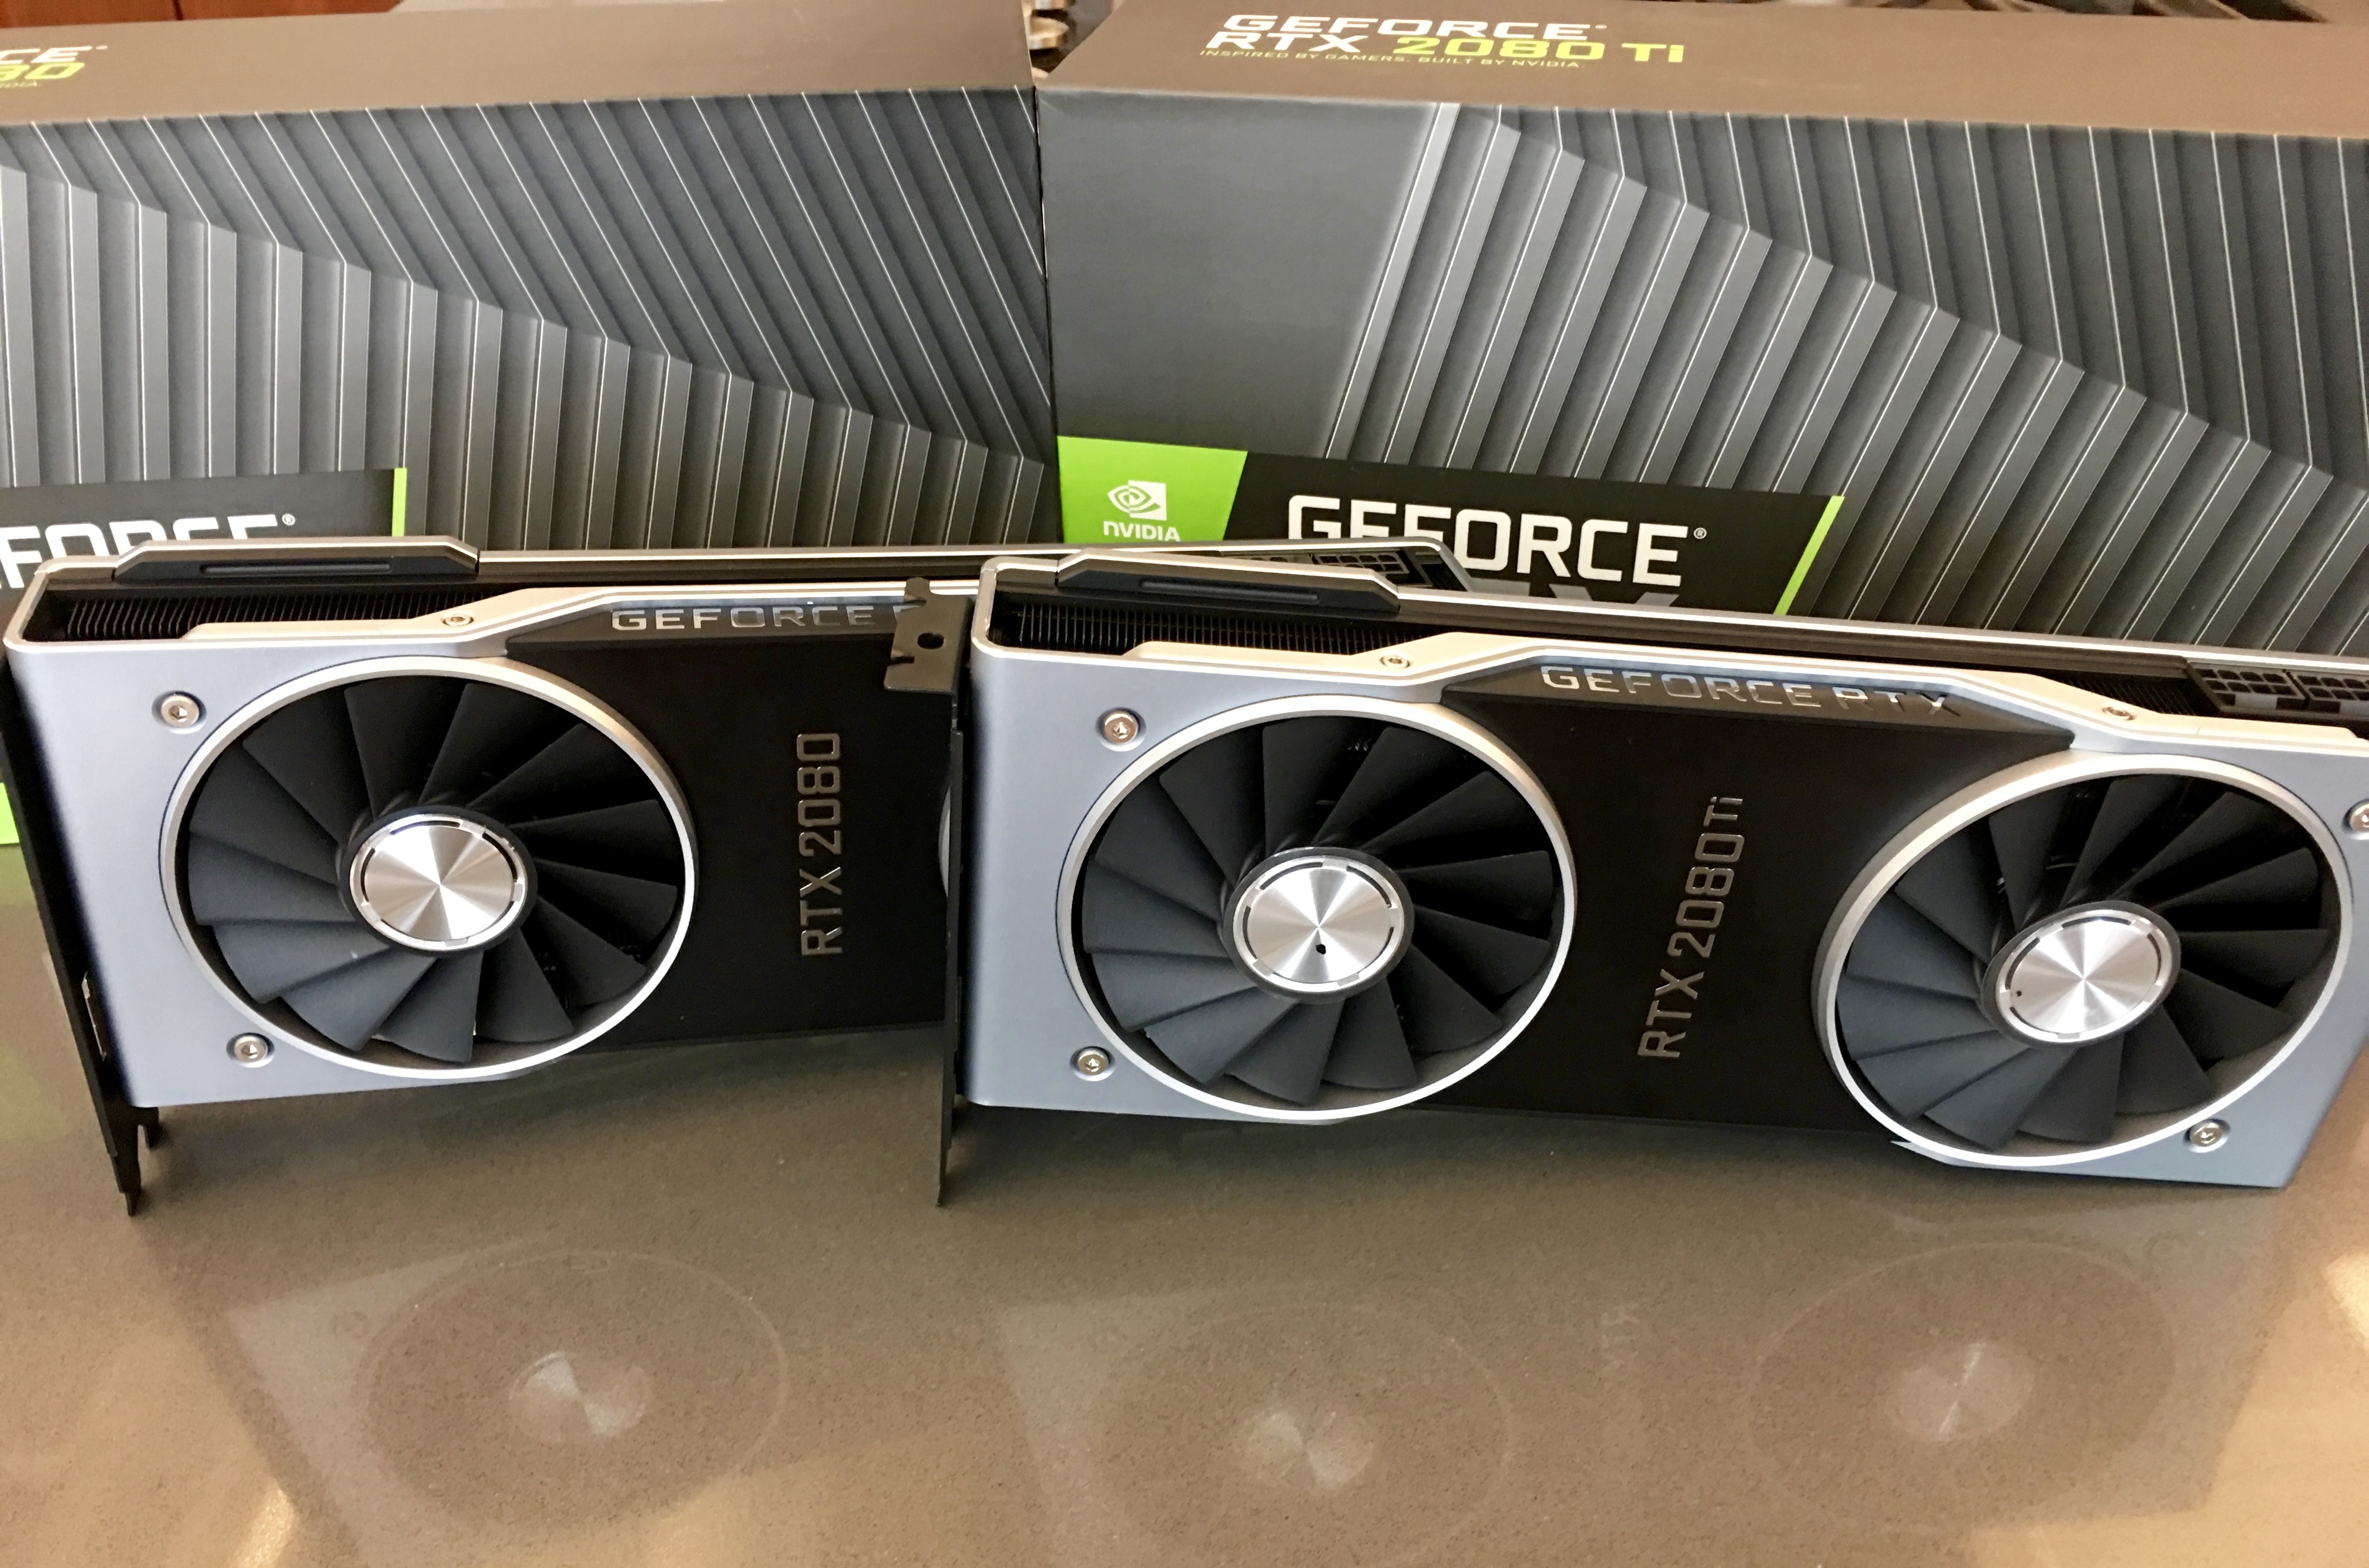 Nvidia RTX 2080 And 2080 Ti Review: Can These Video Cards Handle 4K 60 FPS?  - GameSpot